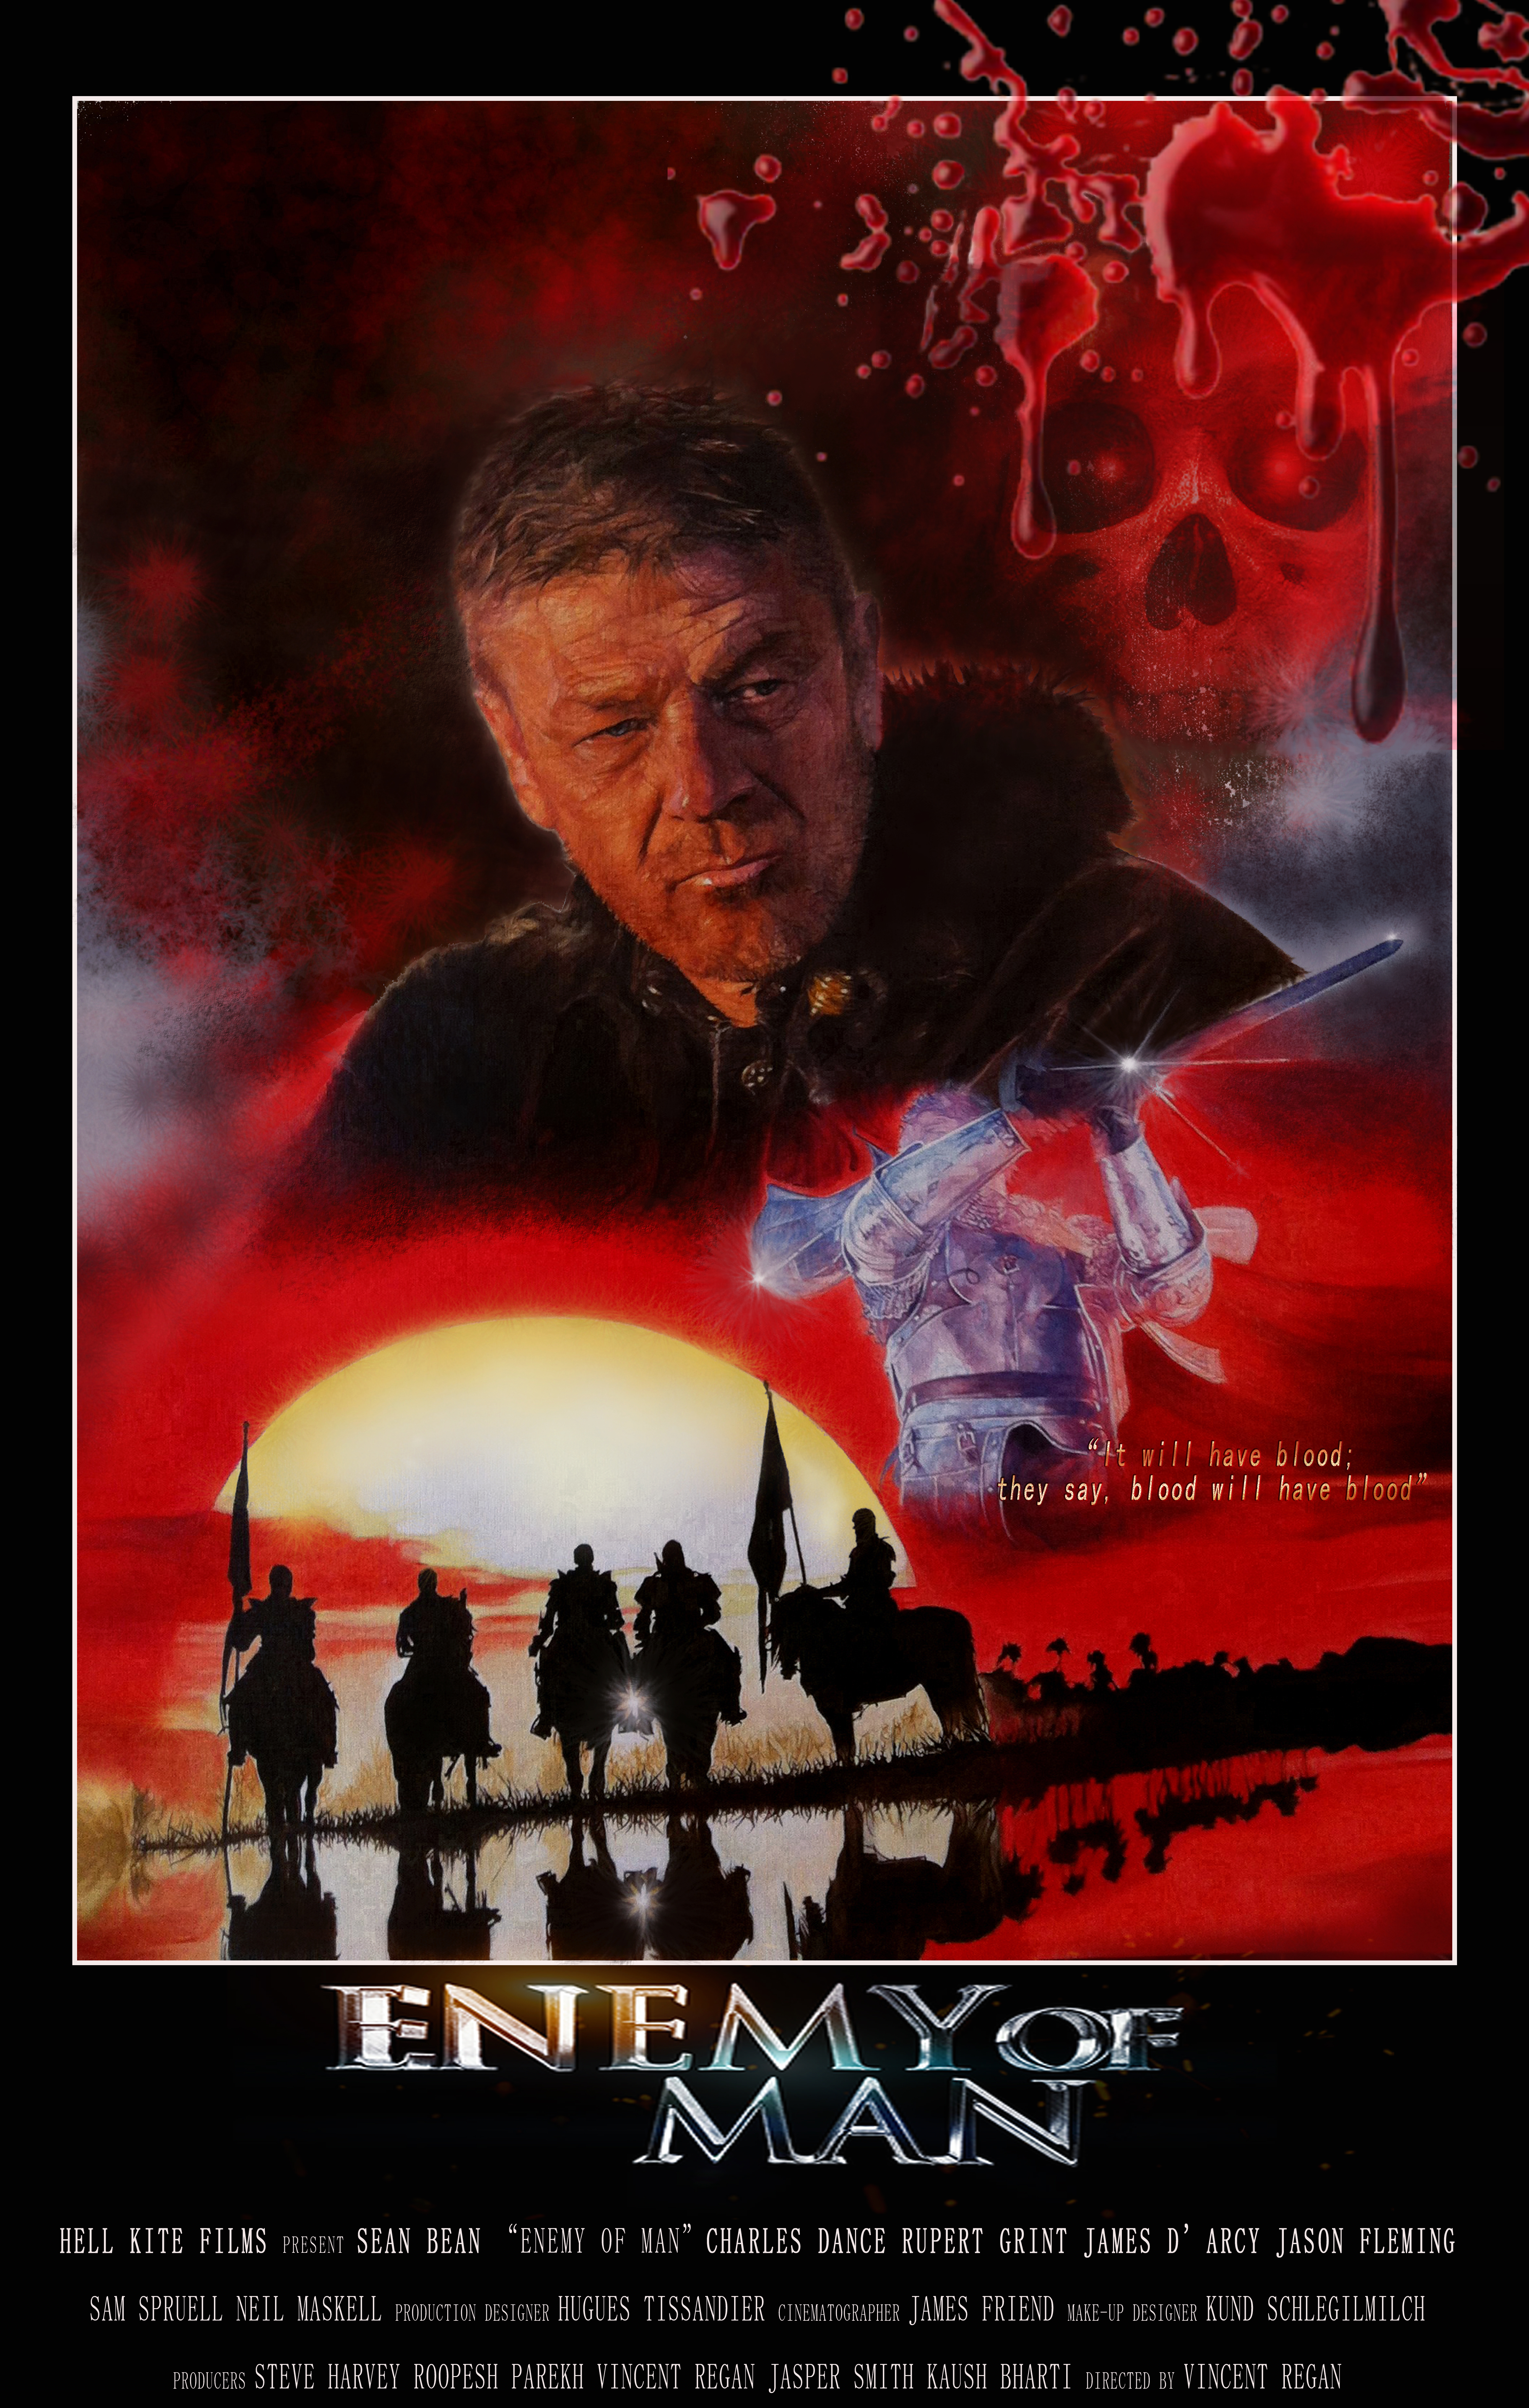 Enemy of Man Directed by Vincent Regan, With Sean Bean, Rupert Grint, Charles Dance, James D'arcy. Producers : Steve Harvey, Roopesh Parekh, Vincent Reagan, Kaush Bharti, Associate producer & poster artist : Ciara McAvoy